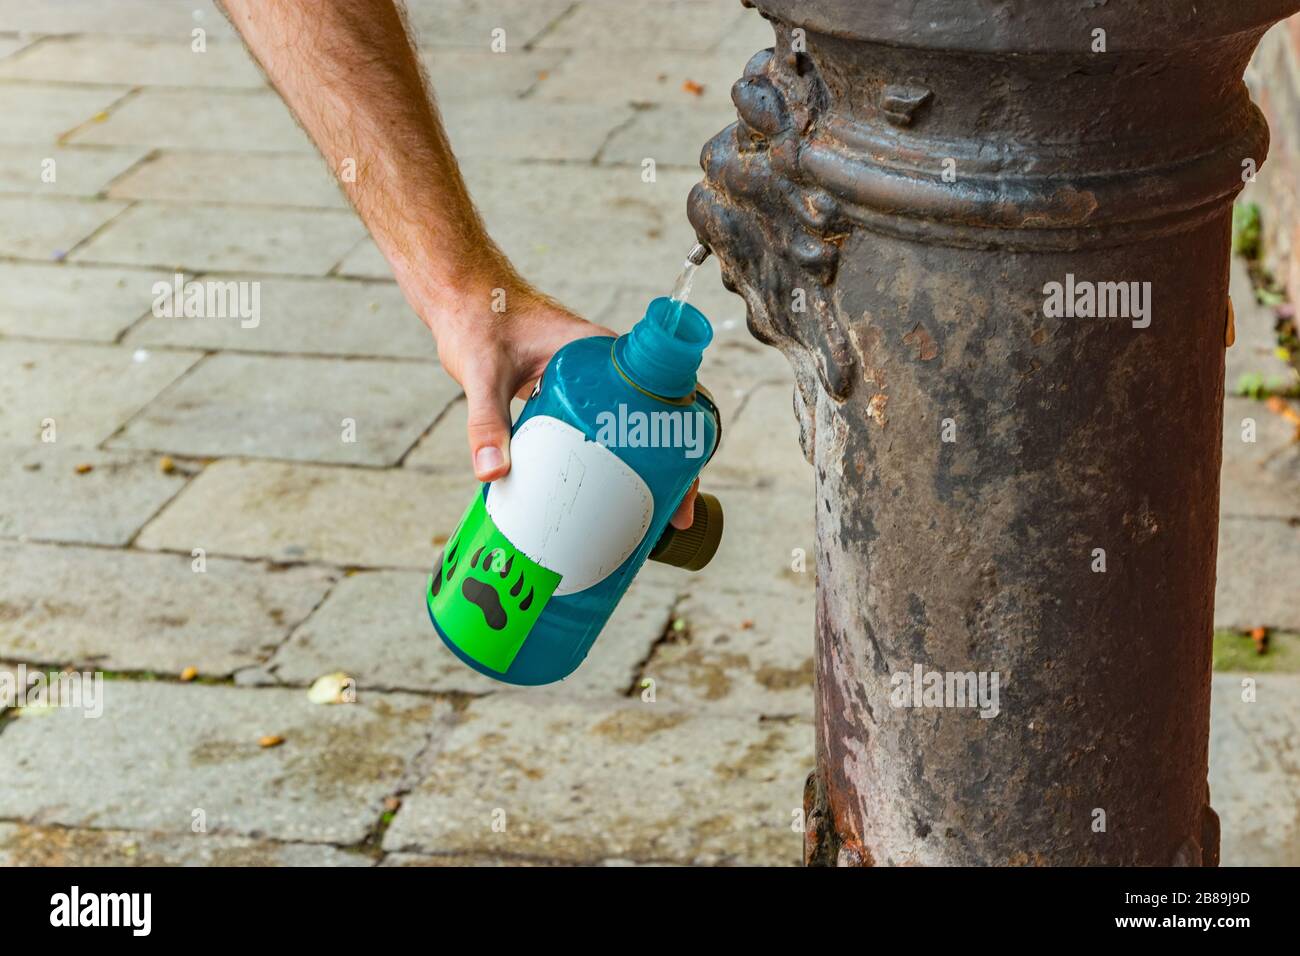 Man filling white blue plastic sport bottle using Old bronze public street tap for fresh water. Traditional drinking water fountain Venice Italy. Stock Photo